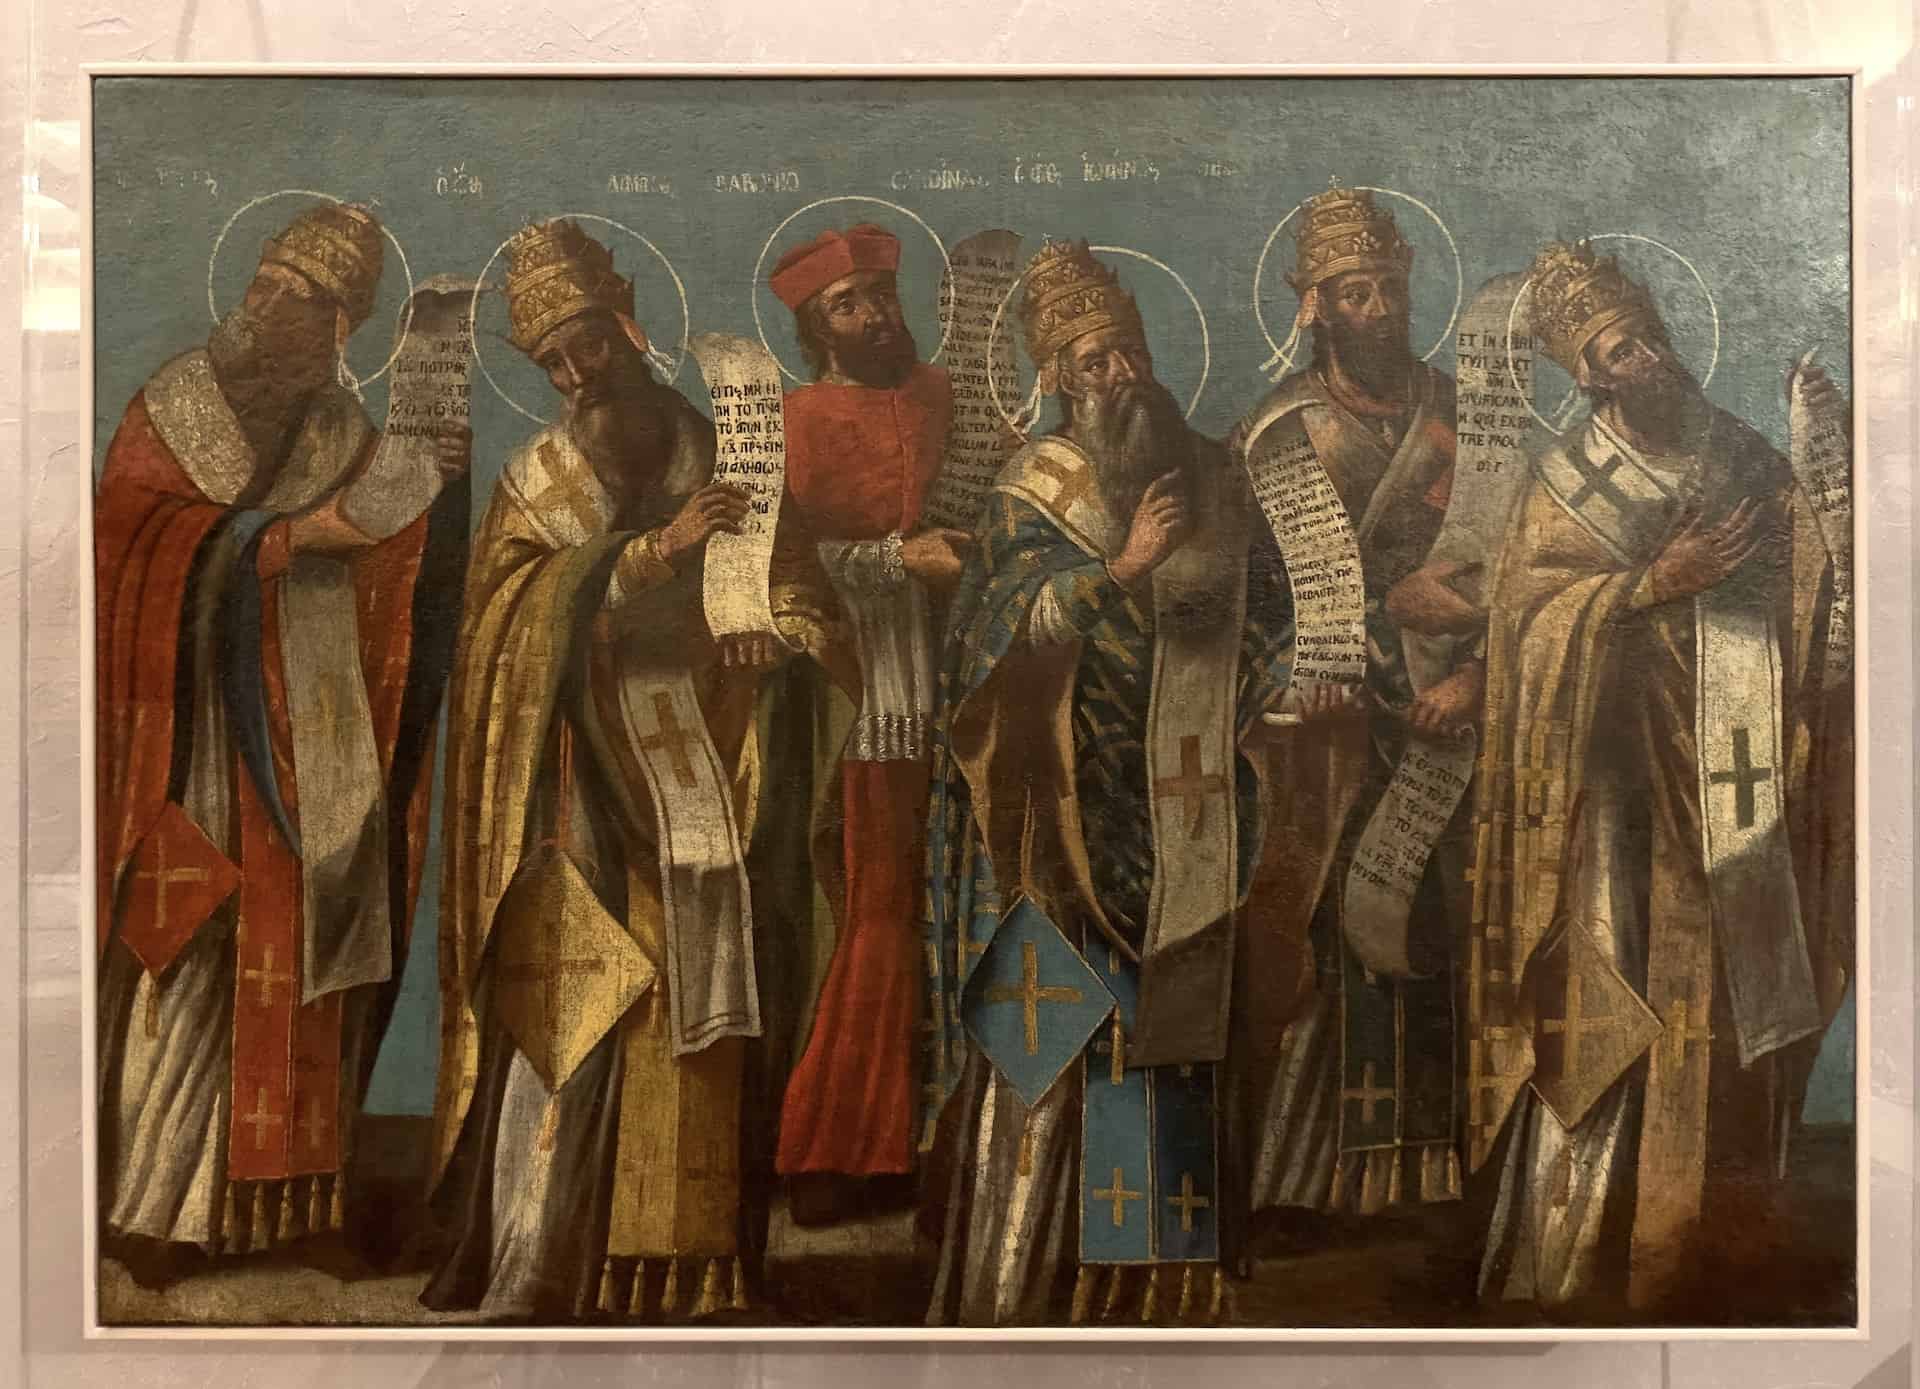 Painting with a depiction of the Church Fathers condemning filioque, from the lonian Islands, late 18th century at the Byzantine Museum in Athens, Greece